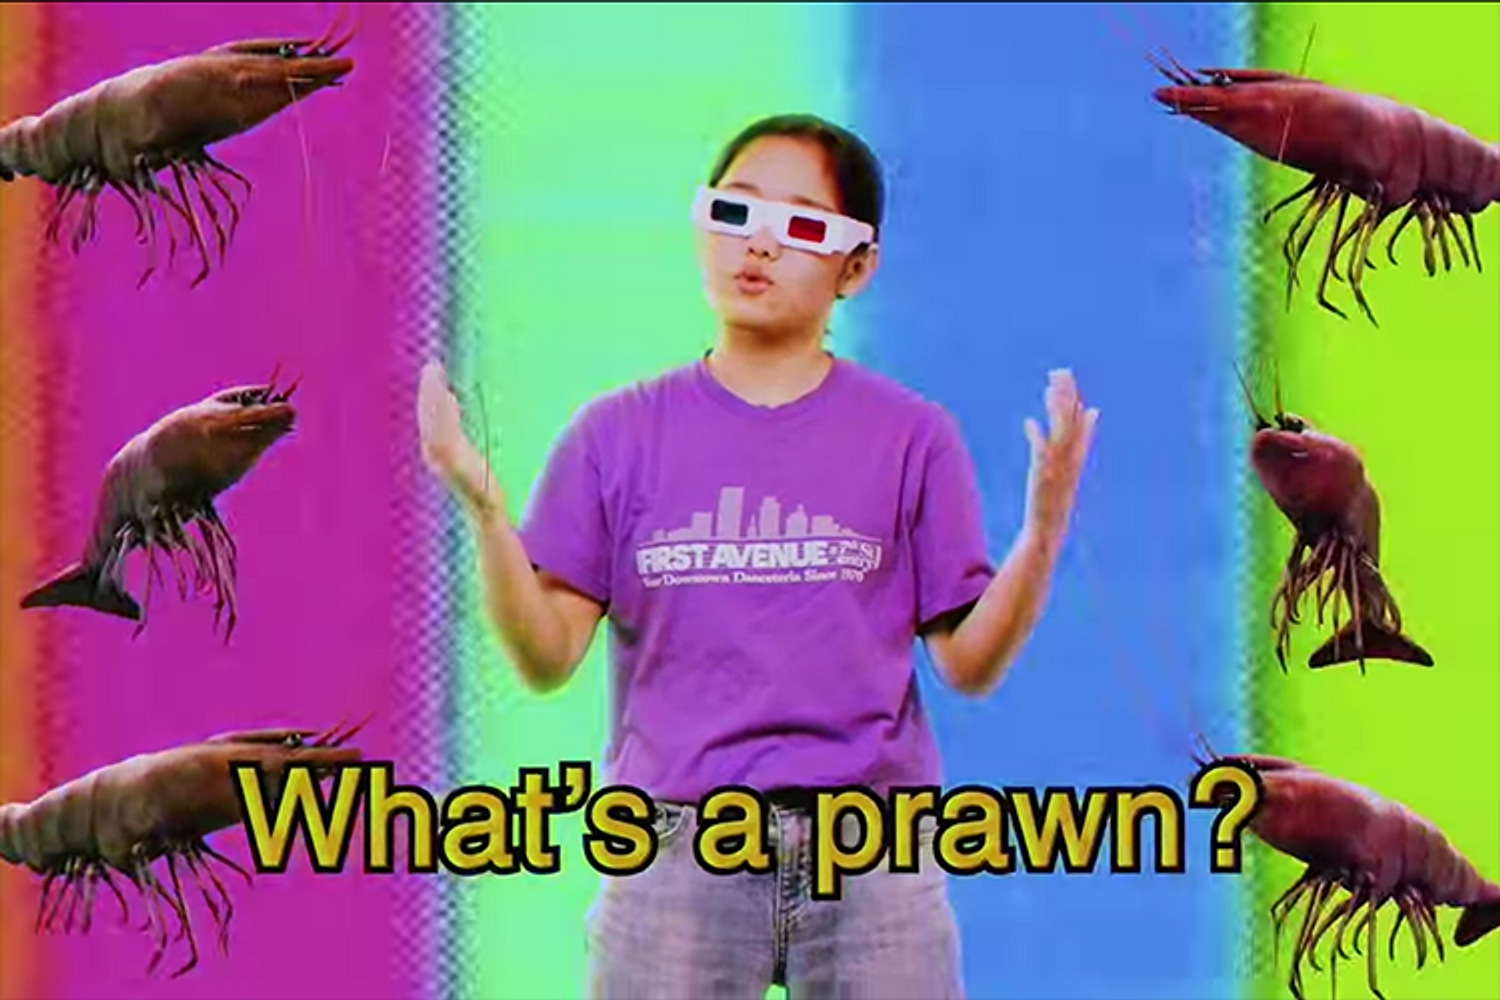 Things get fishy in Superorganism's new video for 'The Prawn Song'